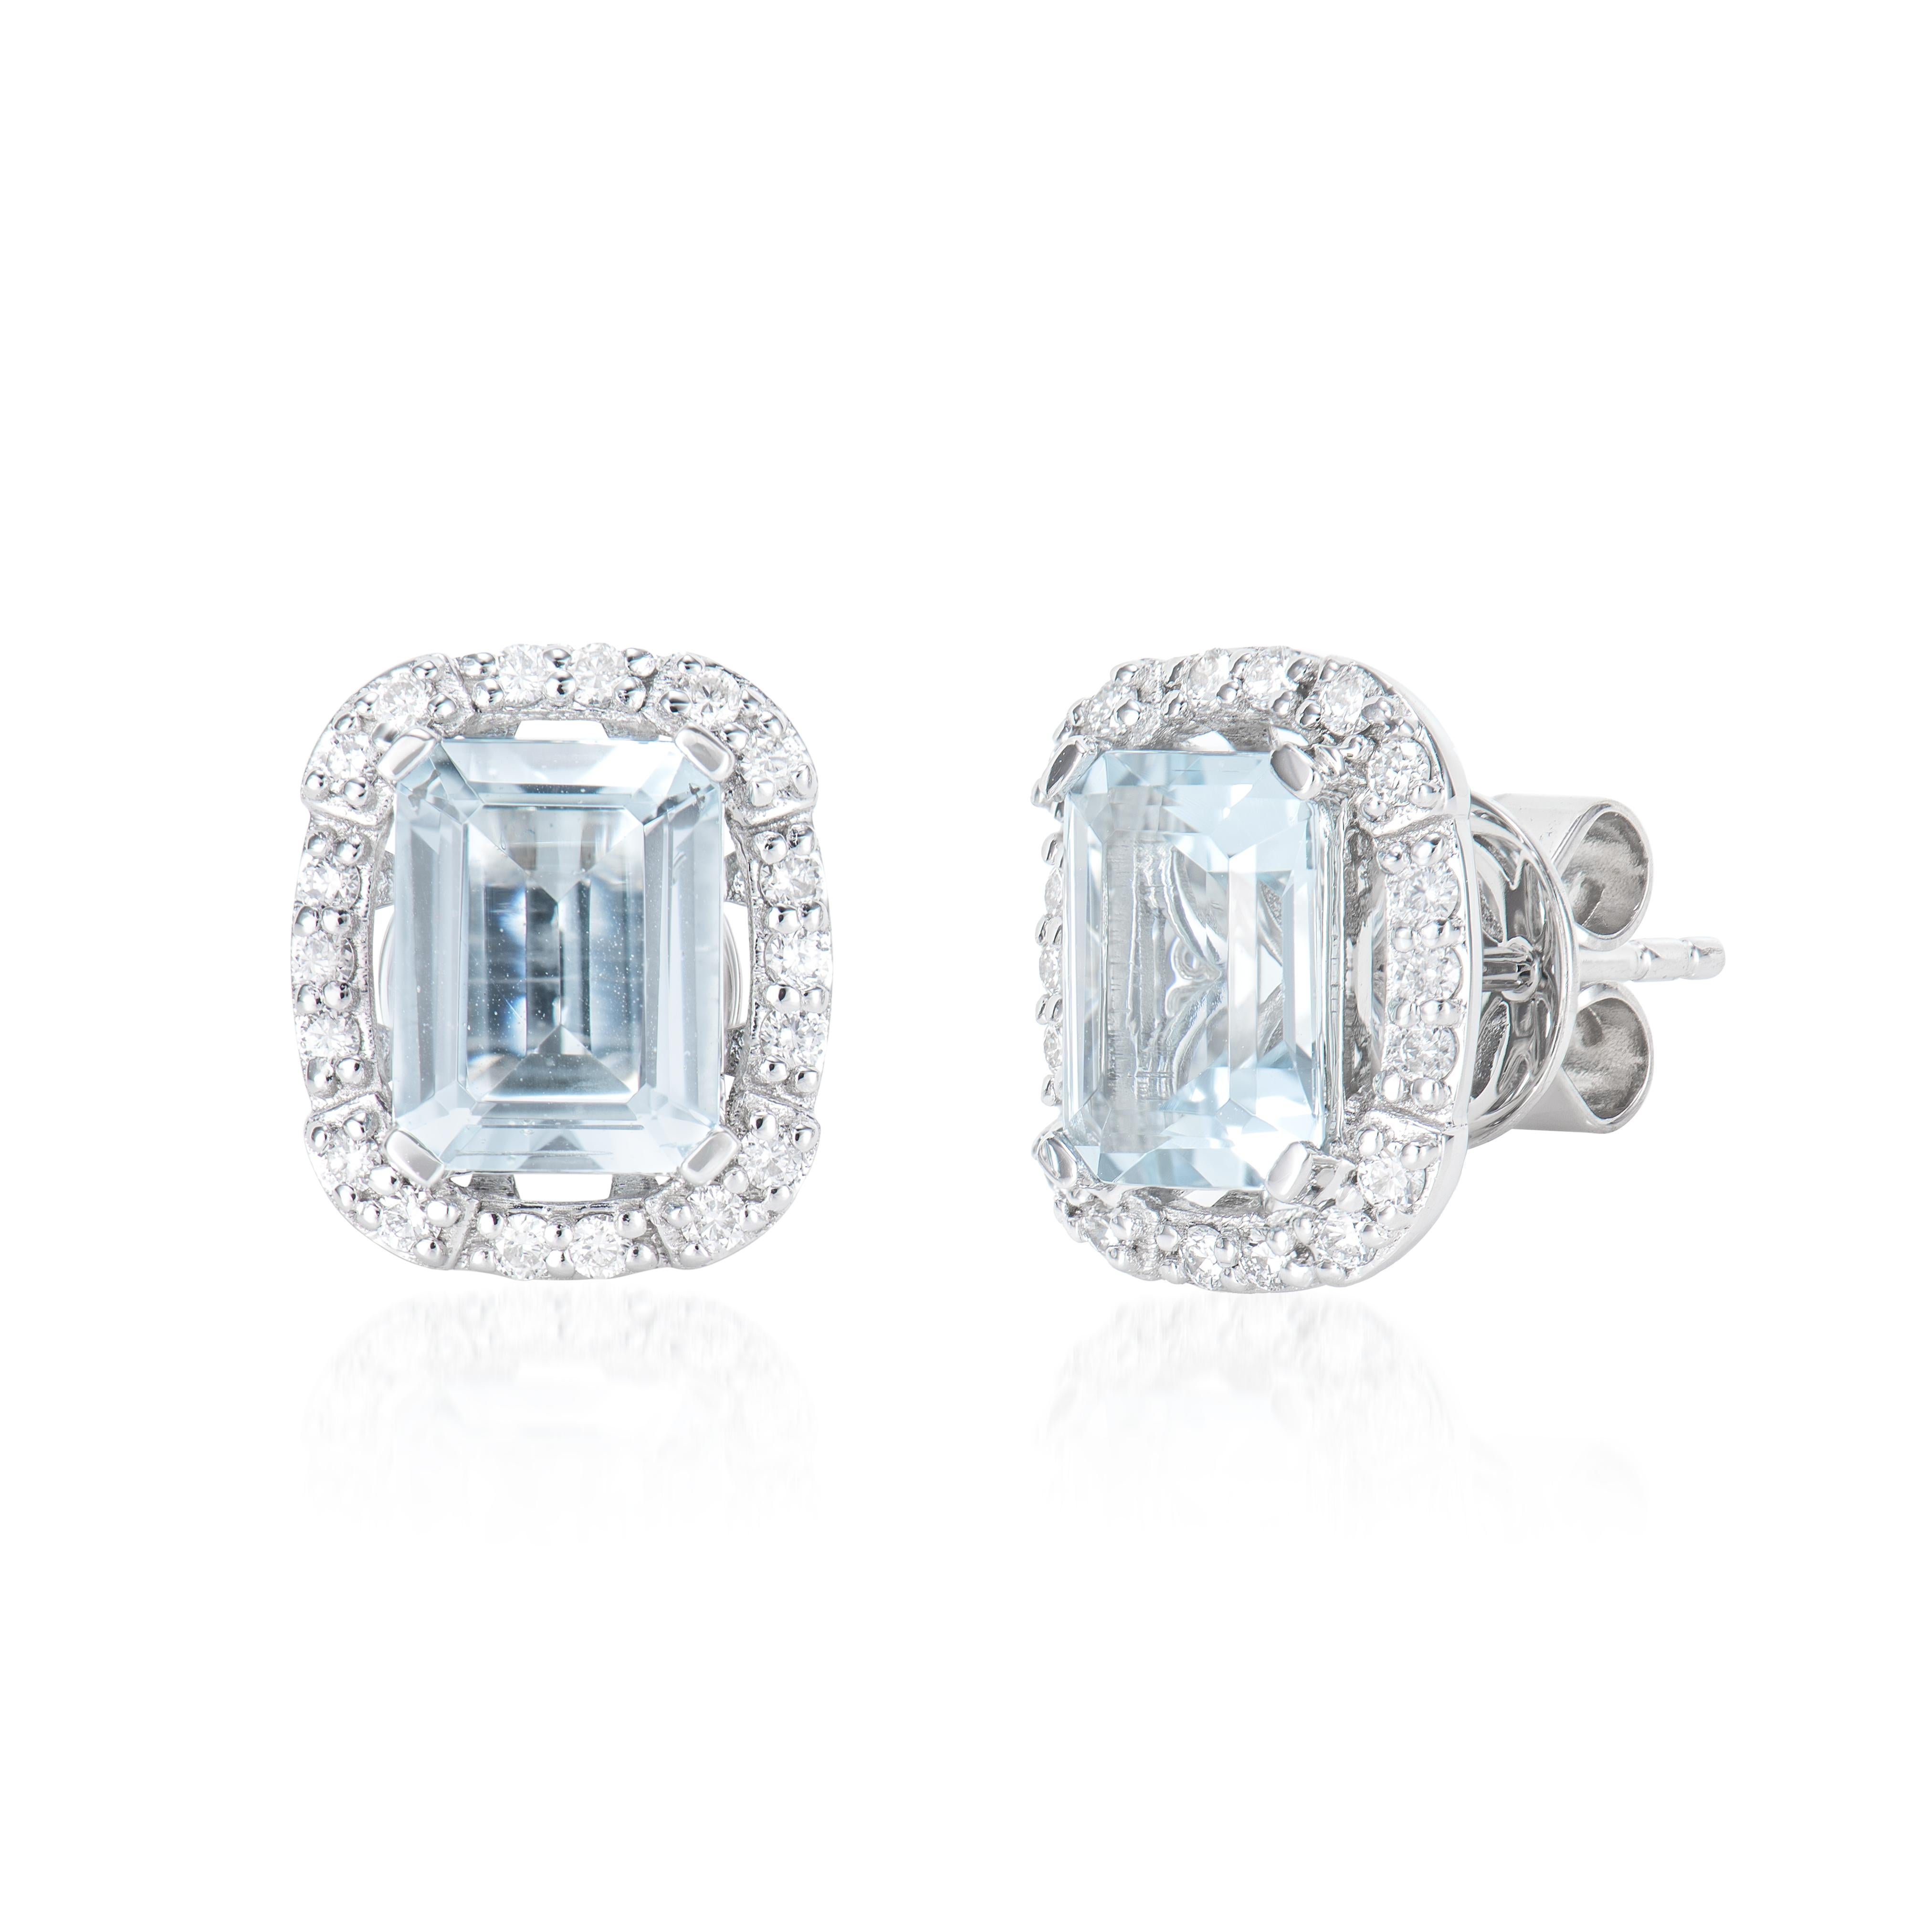 Octagon Cut 2.46 Carat Aquamarine Stud Earrings in 18 Karat White Gold with White Diamond For Sale